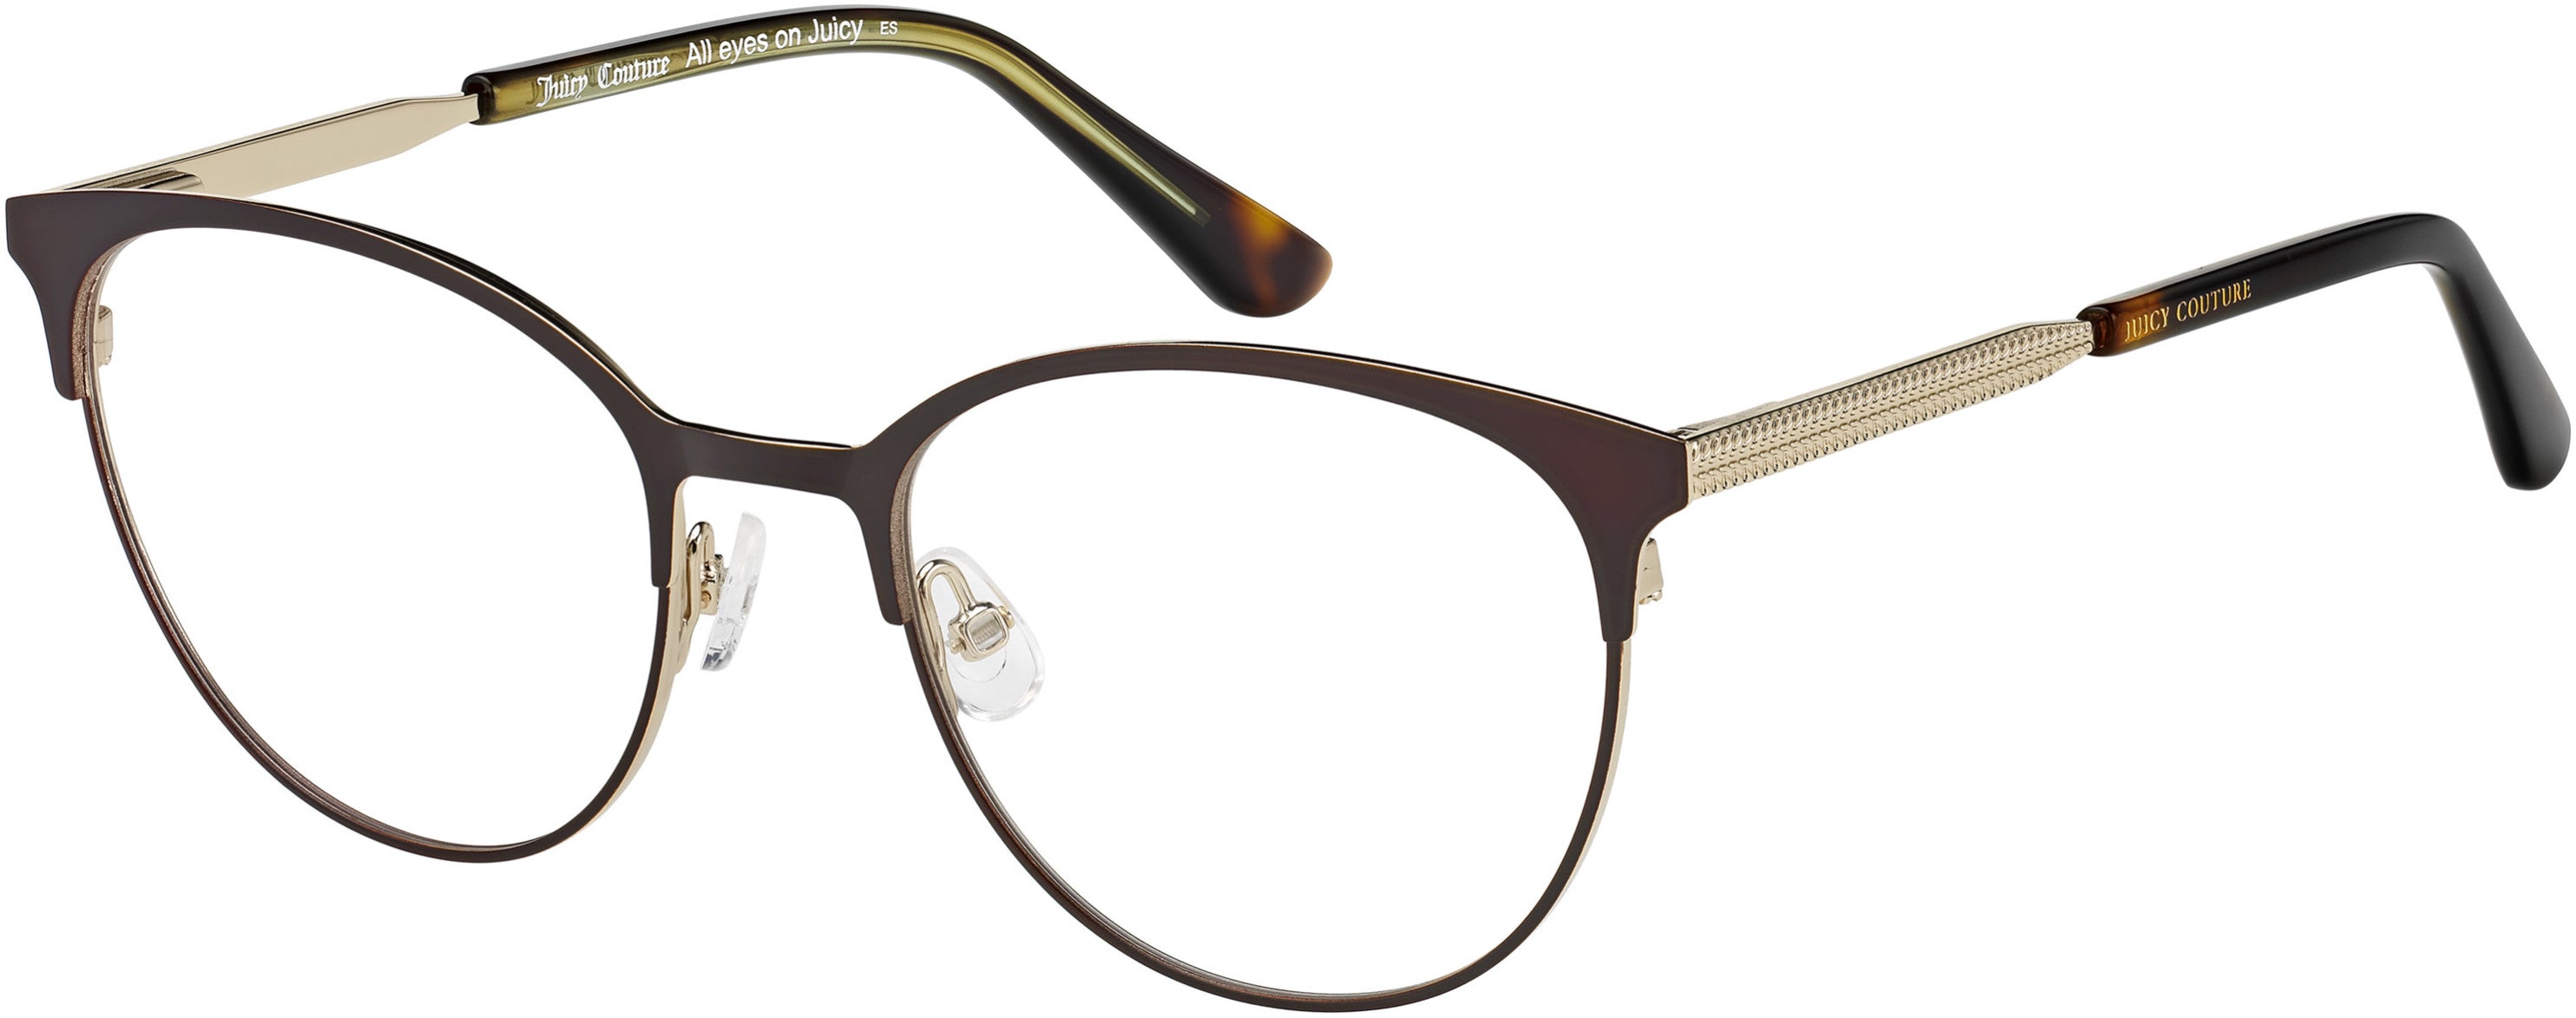 Juicy Couture Juicy 189 Oval Modified Eyeglasses 0YZ4-0YZ4  Matte Brown (00 Demo Lens)